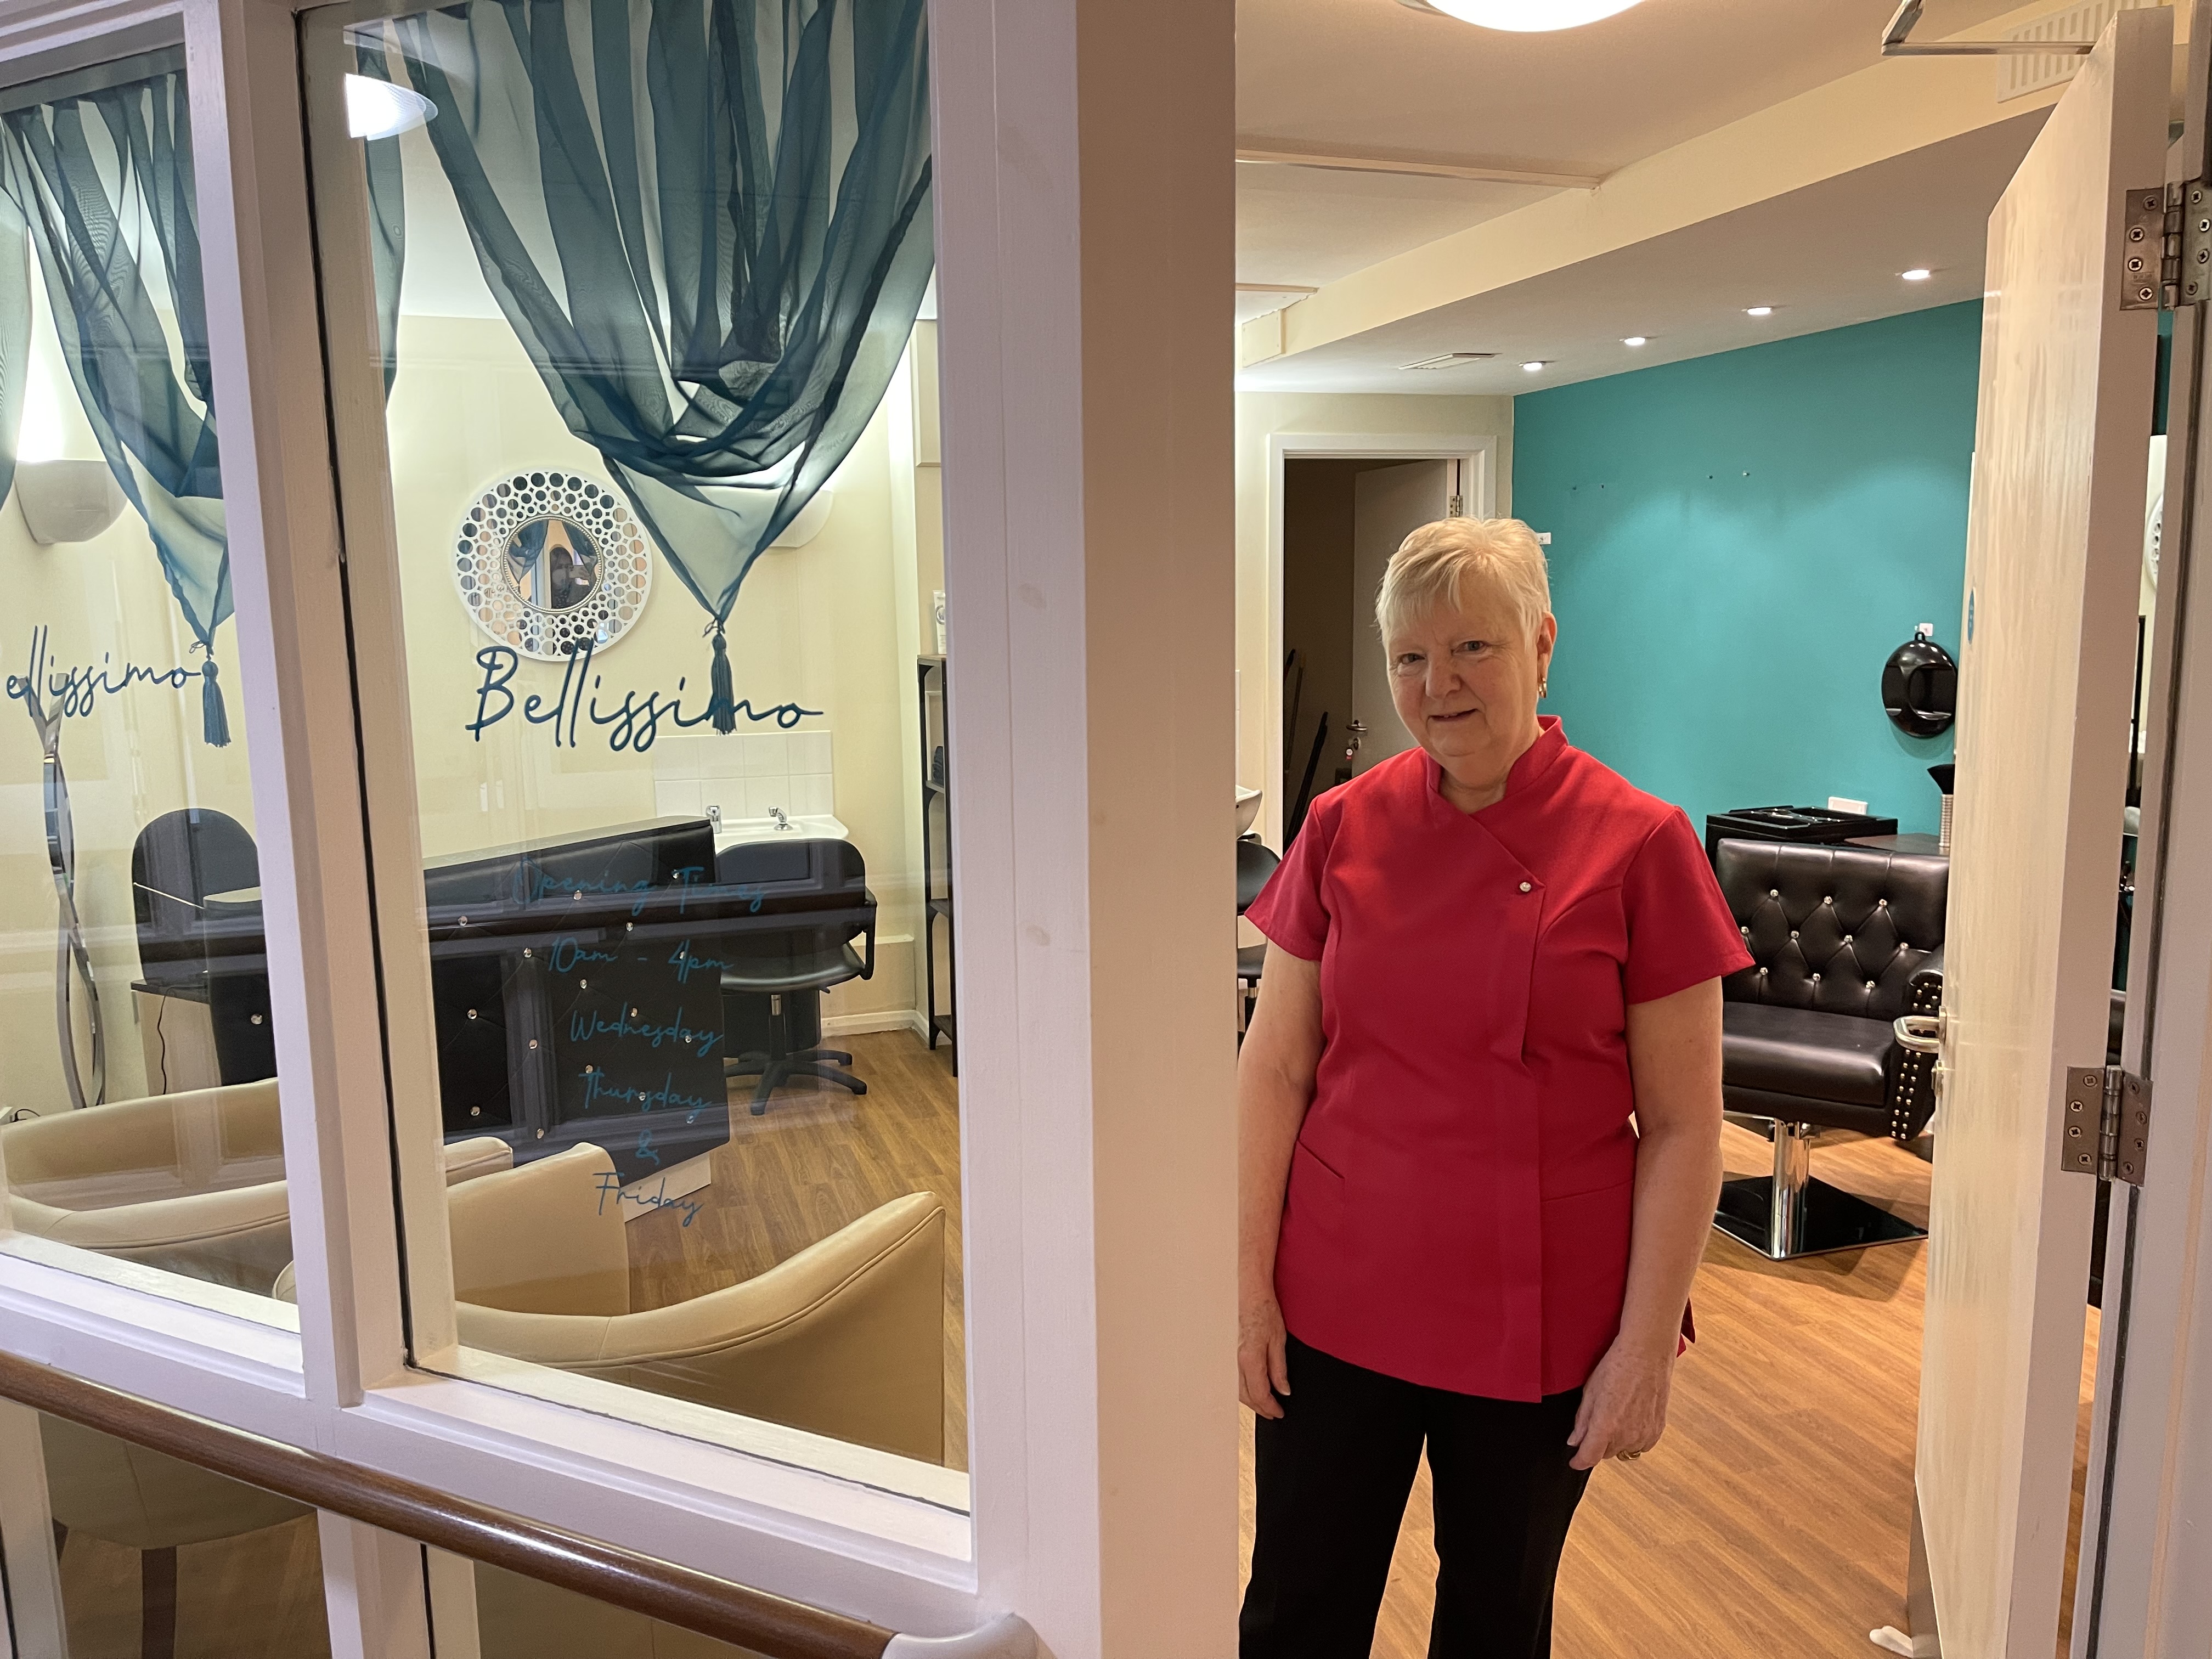 Pat standing next to the revamped salon and new sign